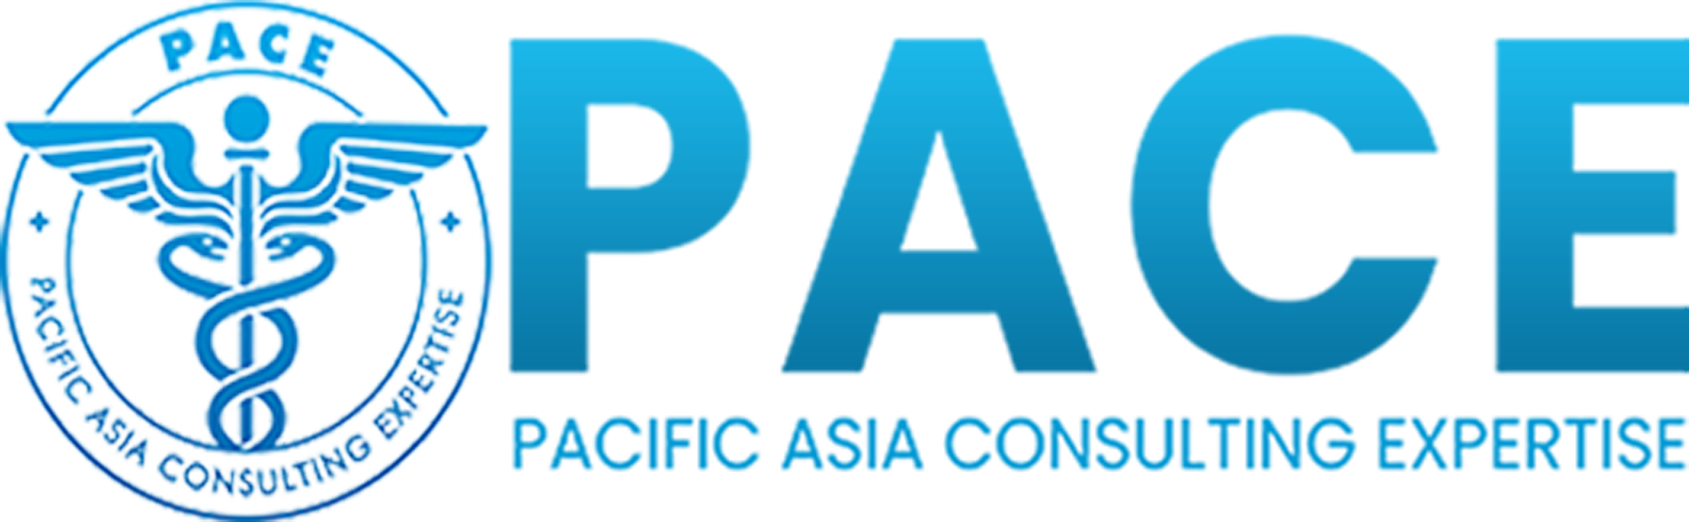 Pacific Asia Consulting Expertise